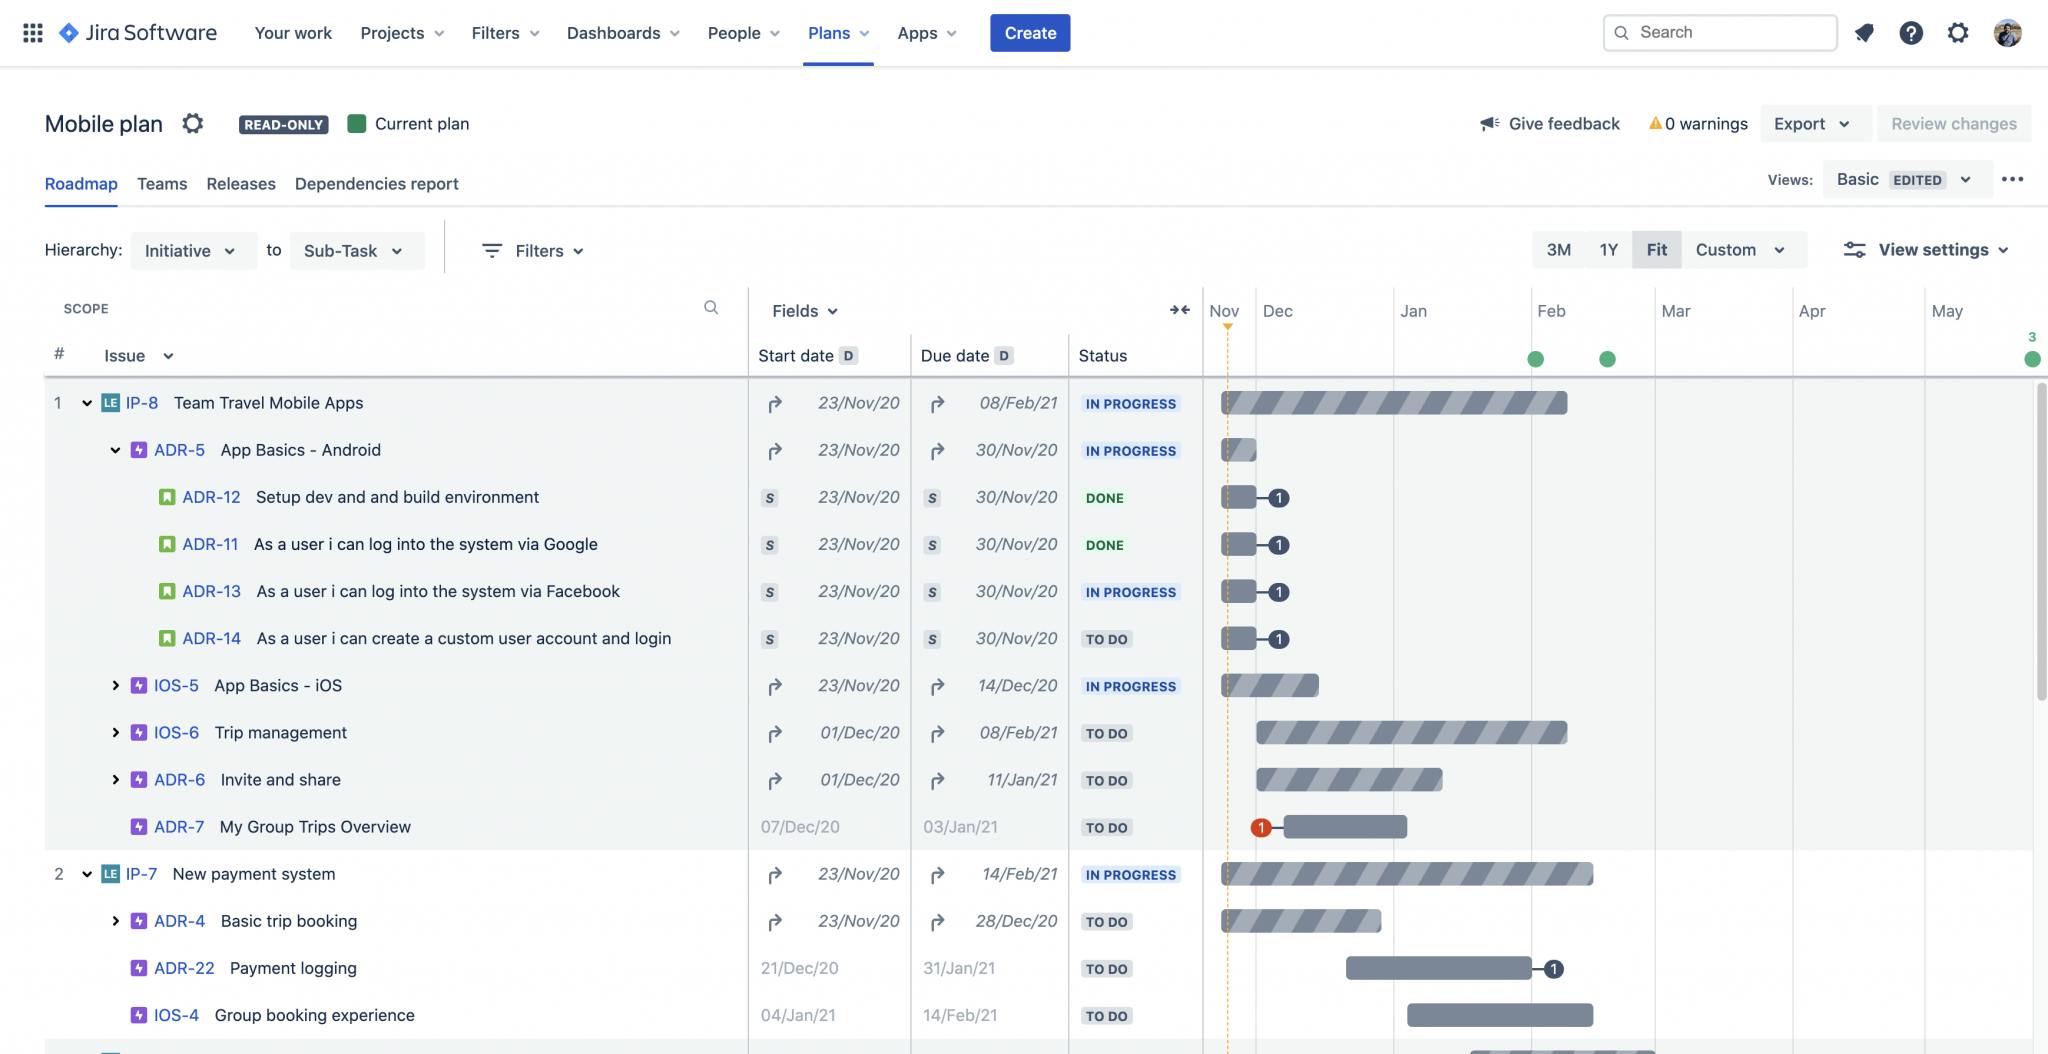 Screenshot of a project within Jira